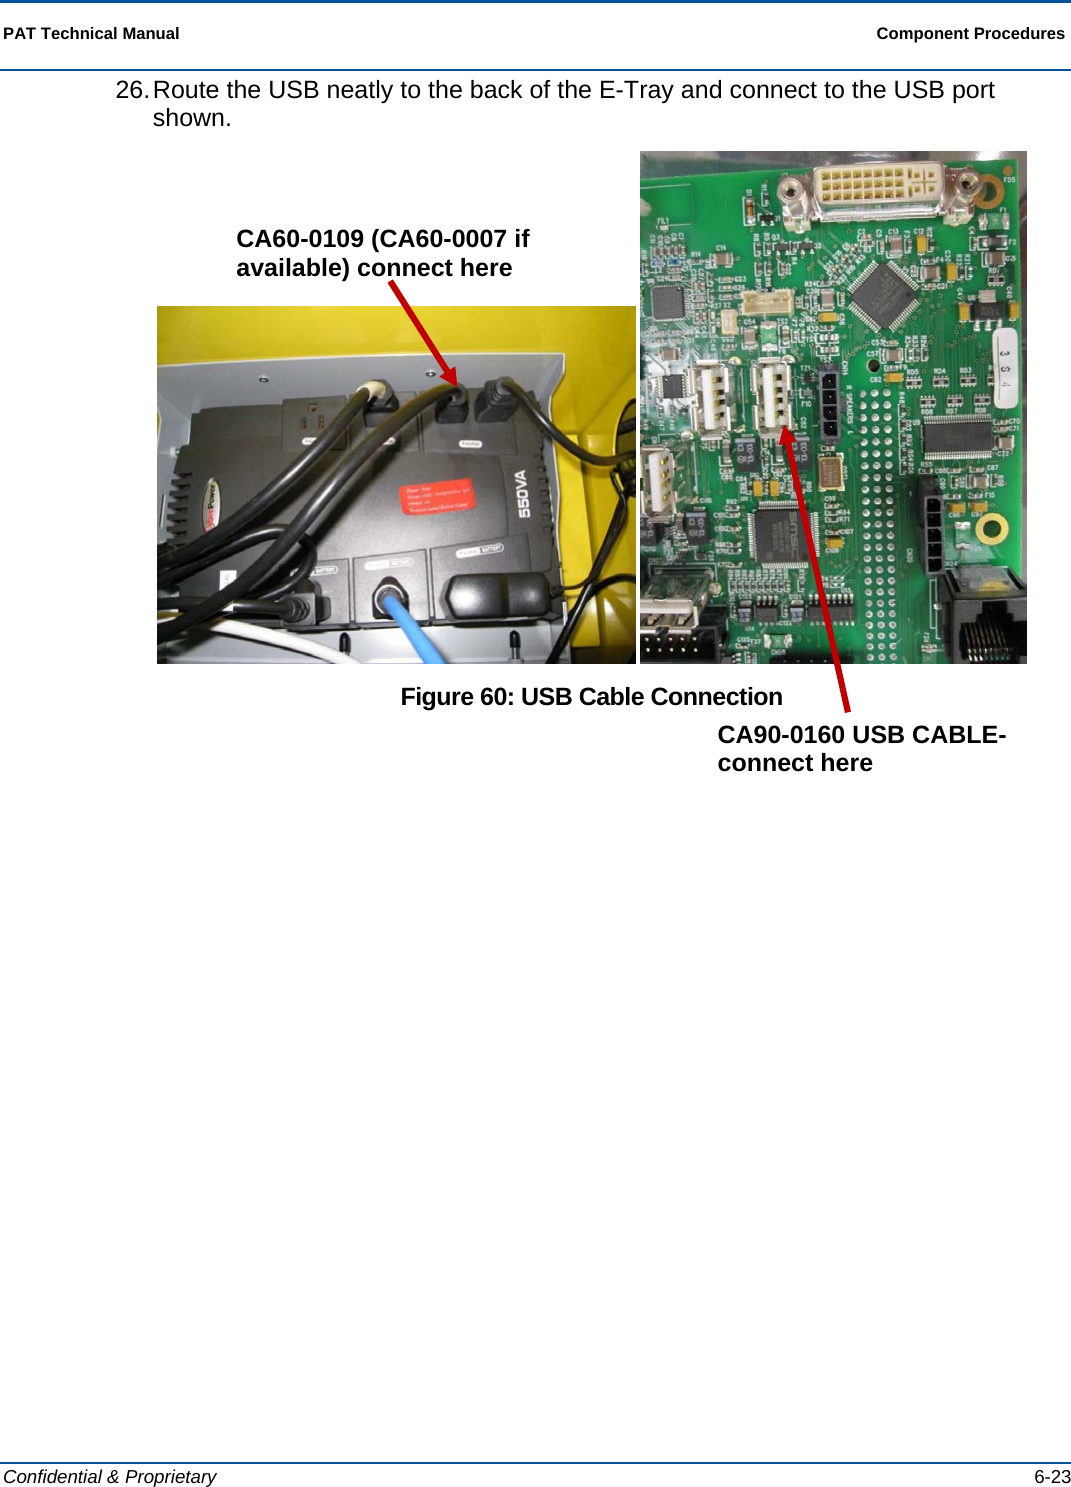  PAT Technical Manual  Component Procedures  Confidential &amp; Proprietary   6-23 26. Route the USB neatly to the back of the E-Tray and connect to the USB port shown.    Figure 60: USB Cable Connection CA60-0109 (CA60-0007 if available) connect here CA90-0160 USB CABLE- connect here 